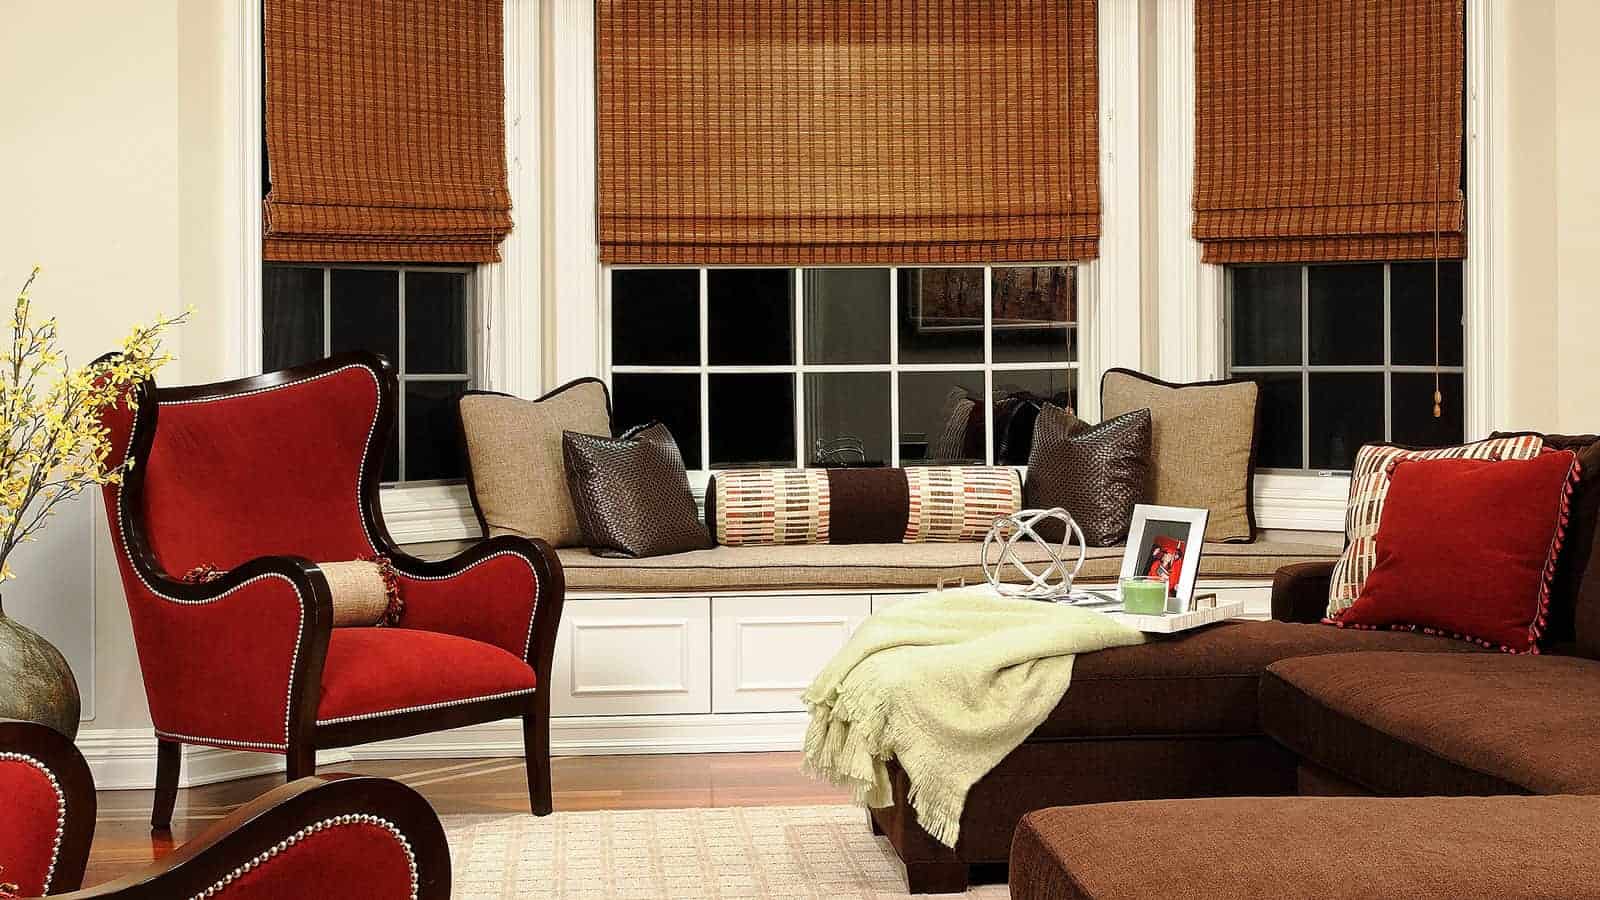 Living room interior design for couples with different color preferences, Roslyn NY